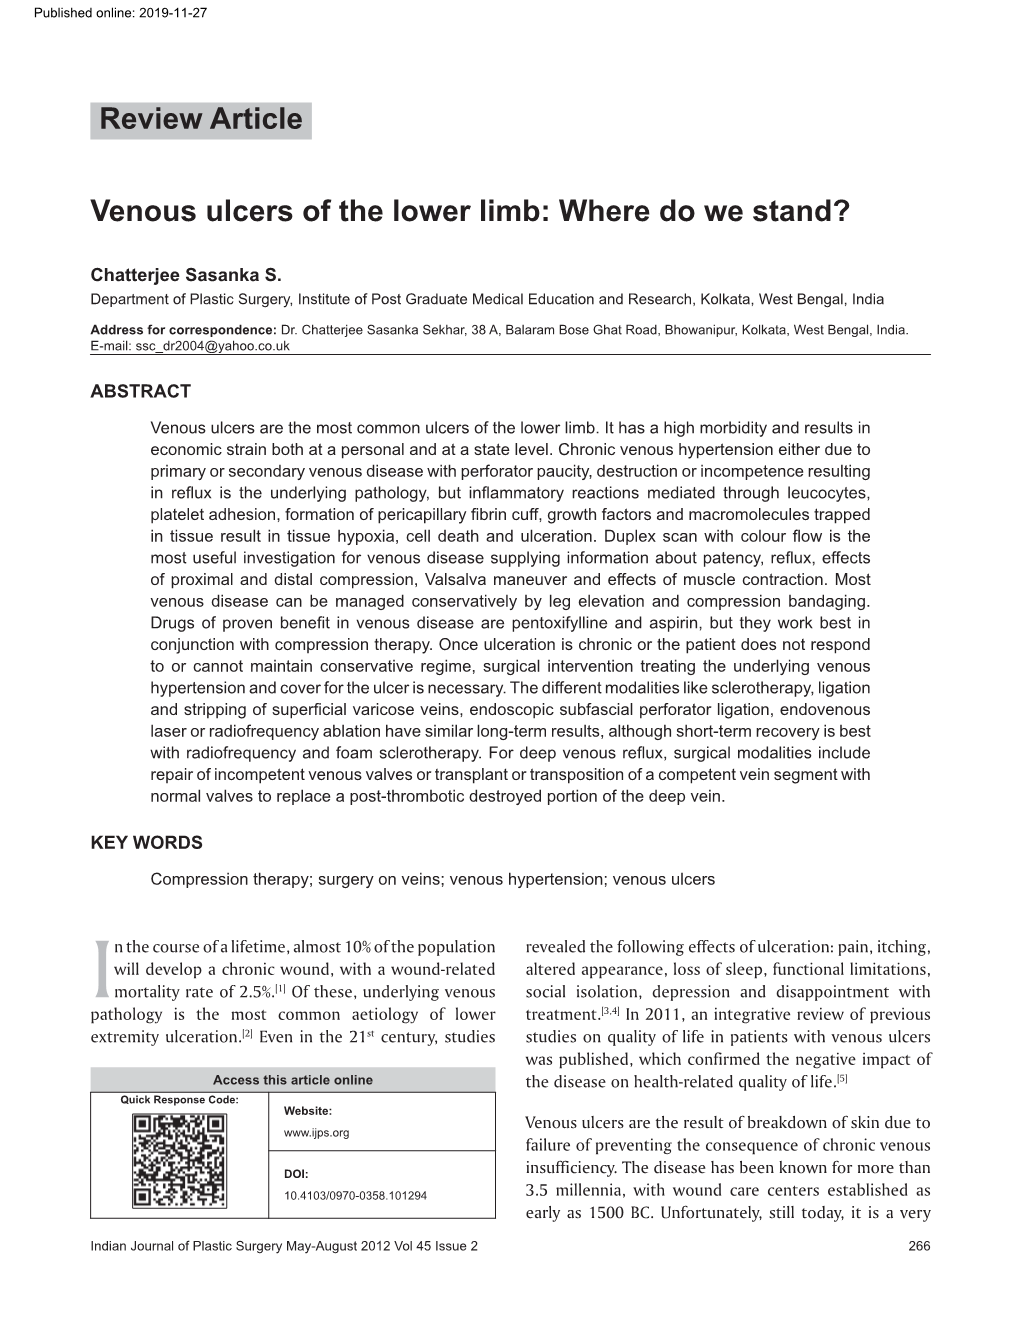 Review Article Venous Ulcers of the Lower Limb